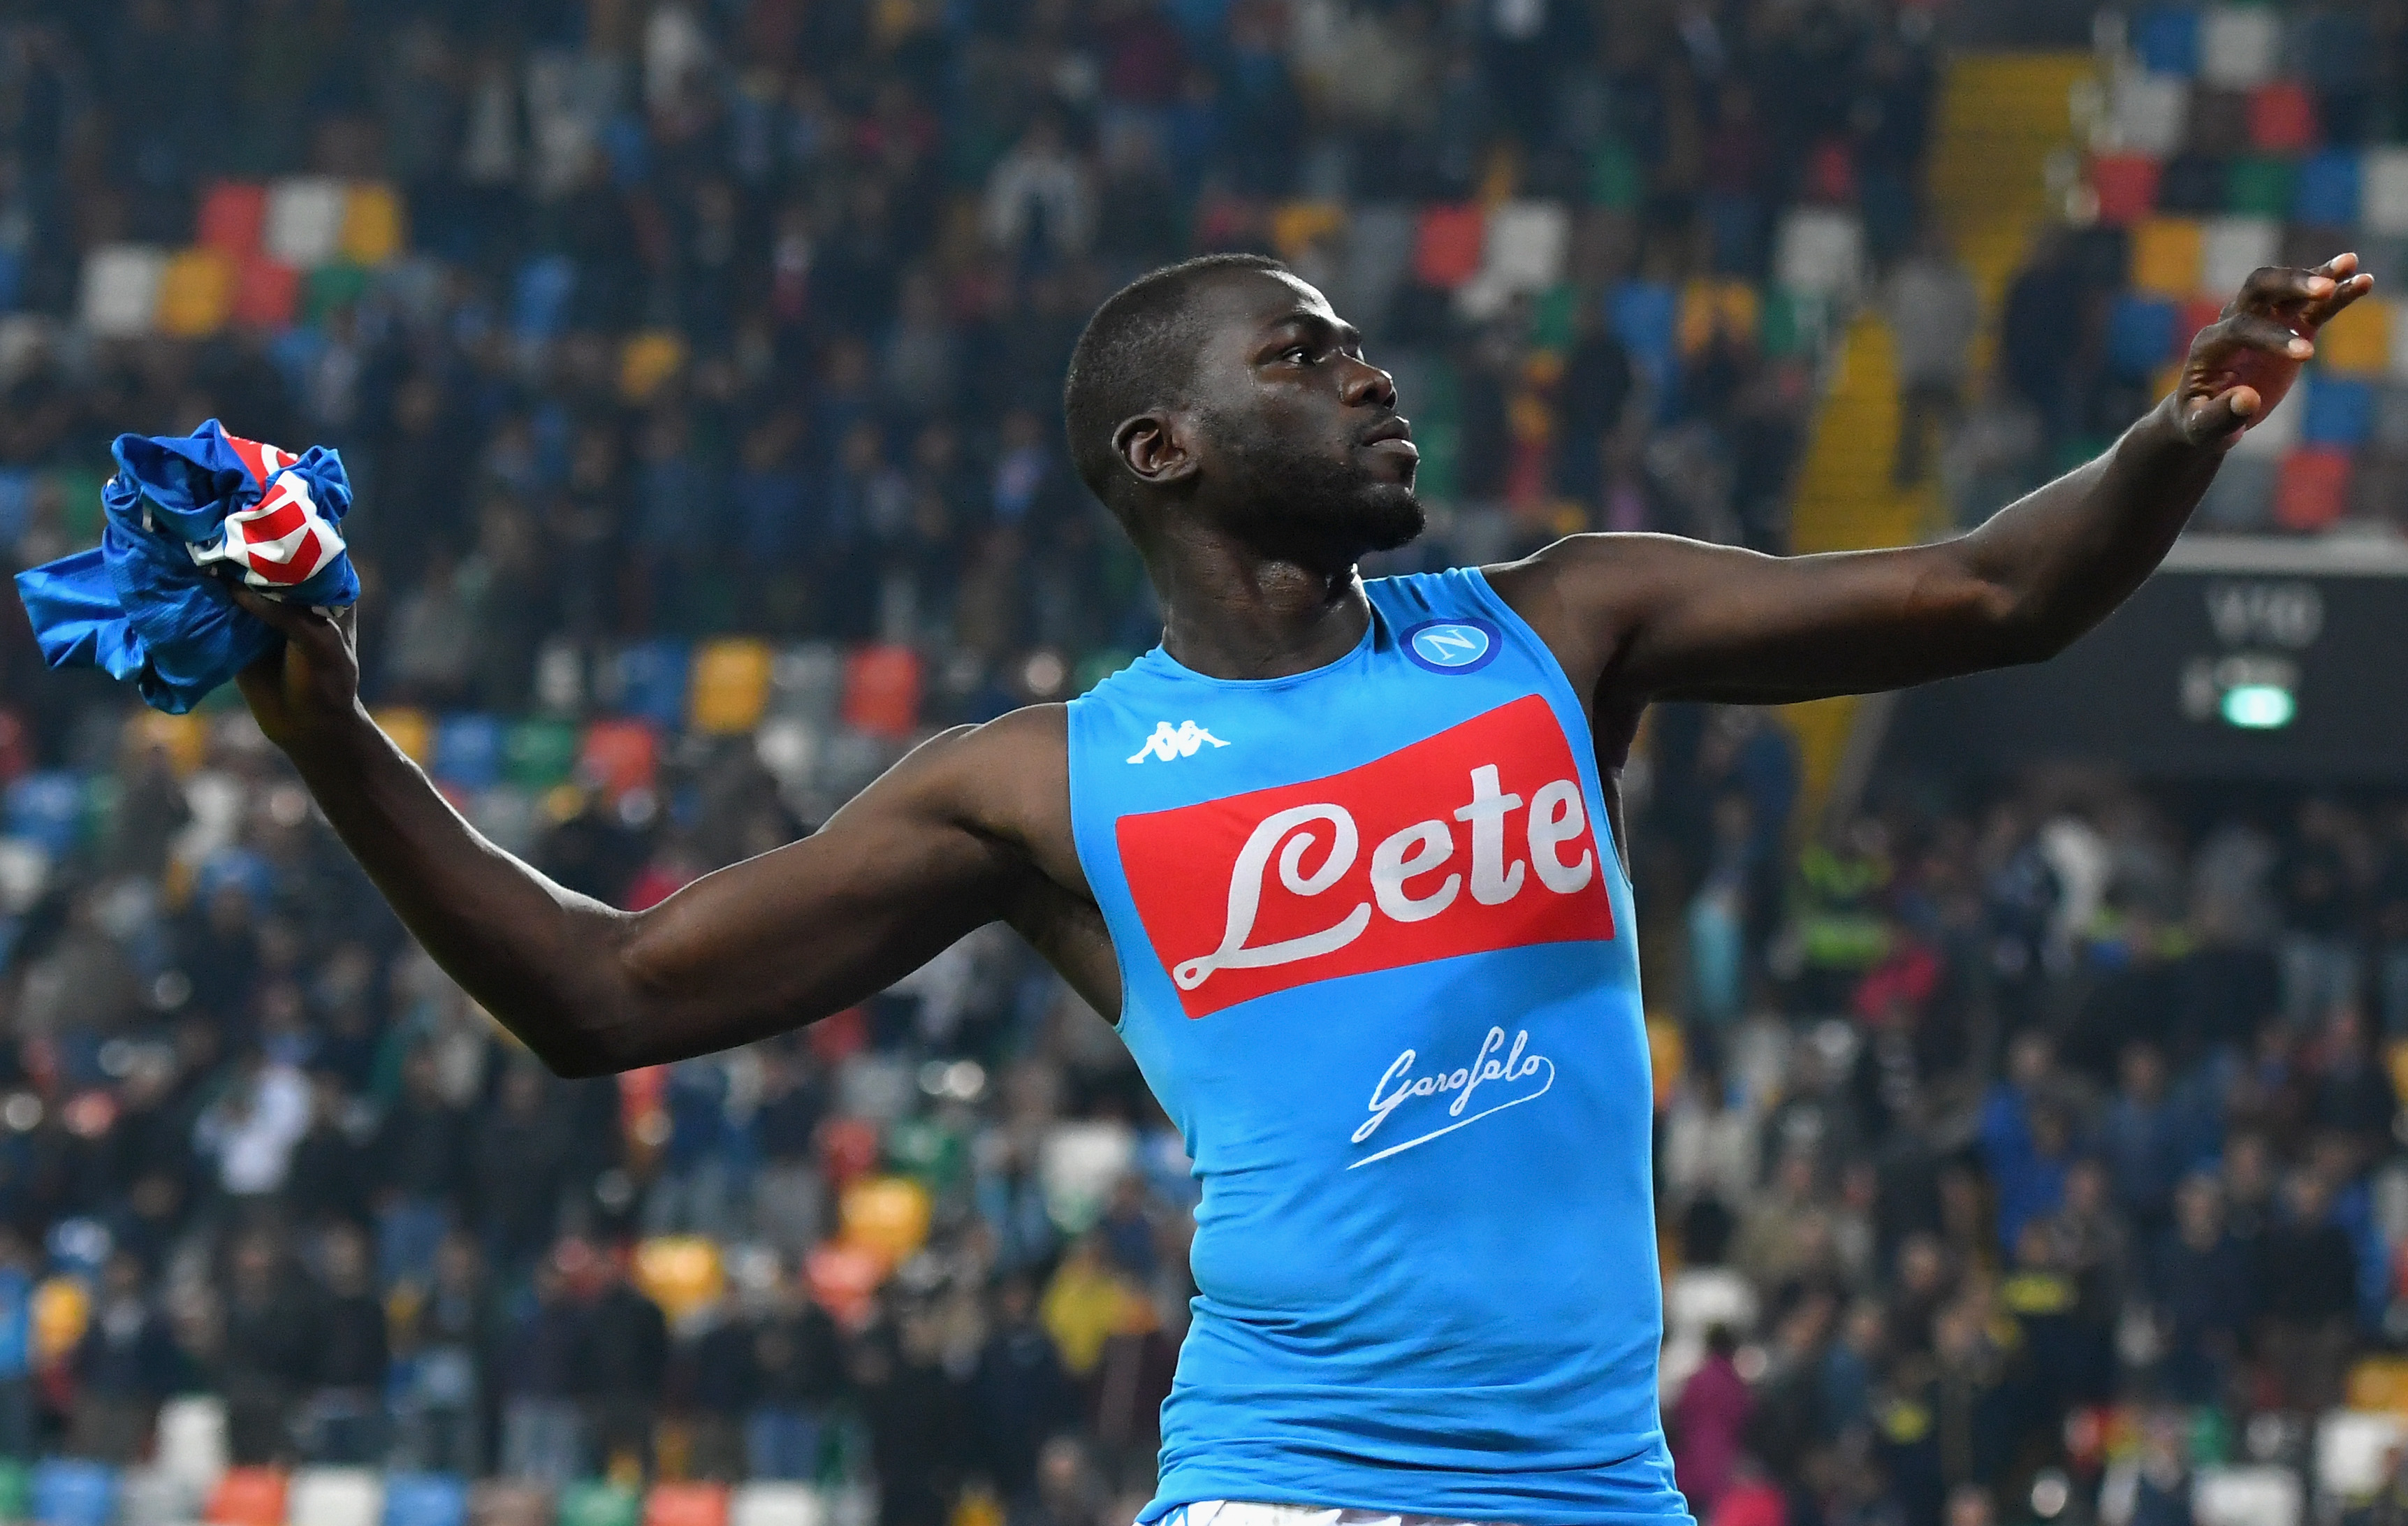 UDINE, ITALY - OCTOBER 20: Kaldou Koulibaly of SSC Napoli celebrates the victory after the Serie A match between Udinese and SSC Napoli at Stadio Friuli on October 20, 2018 in Udine, Italy.  (Photo by Alessandro Sabattini/Getty Images)